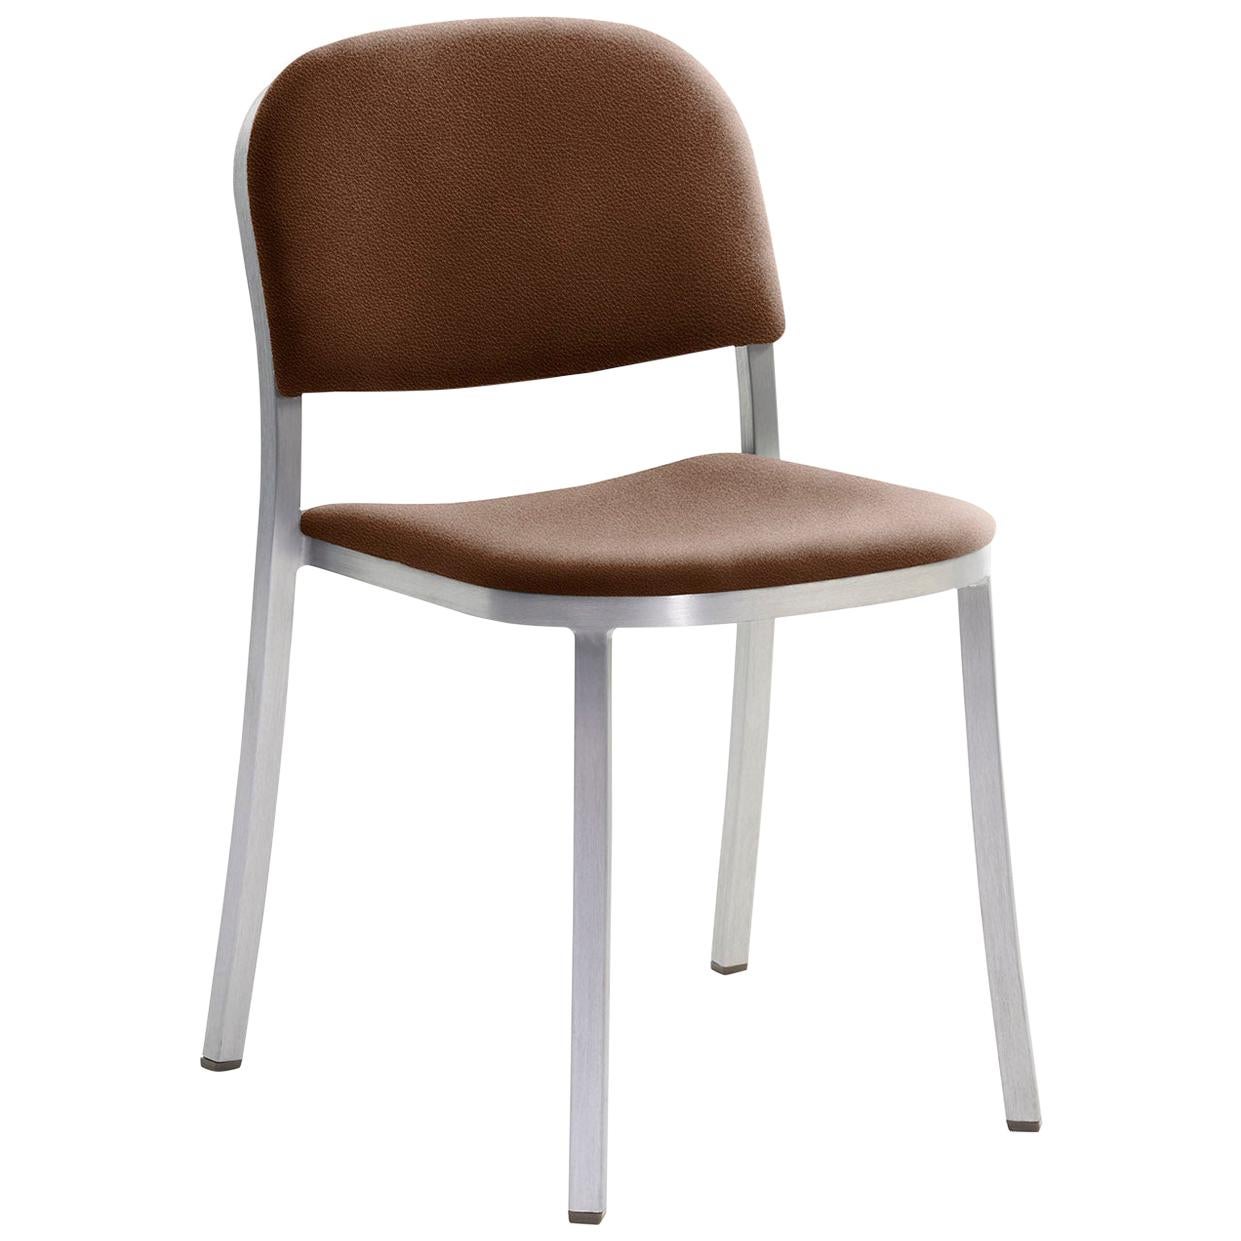 Emeco 1 Inch Stacking Chair with Aluminum Legs & Brown Fabric by Jasper Morrison